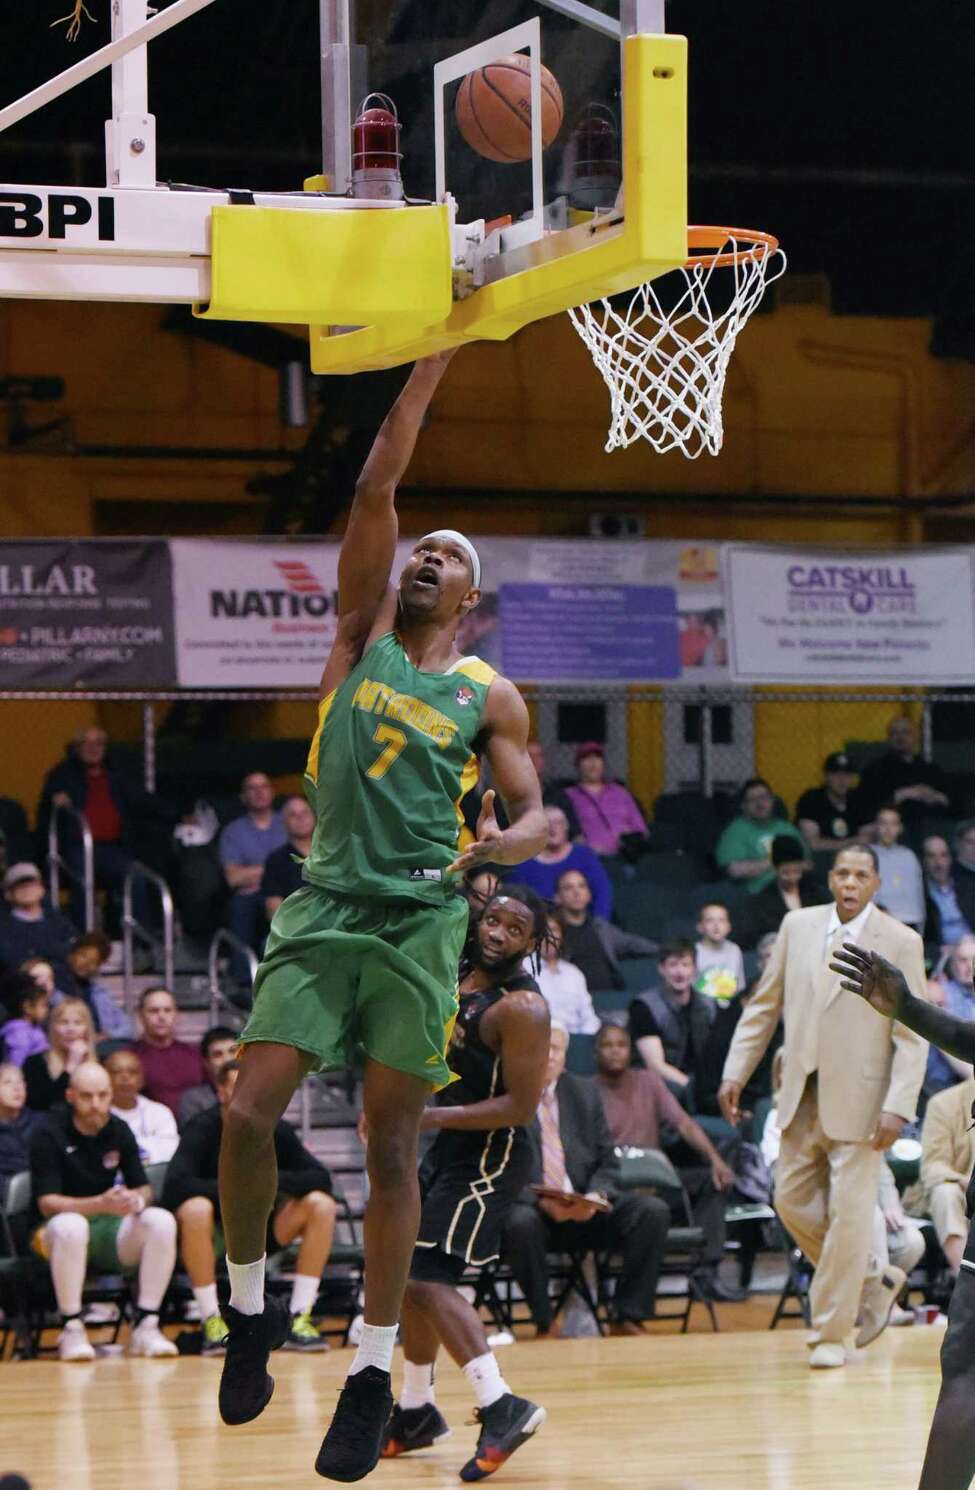 Albany Patroons to return in 2020 with new owner